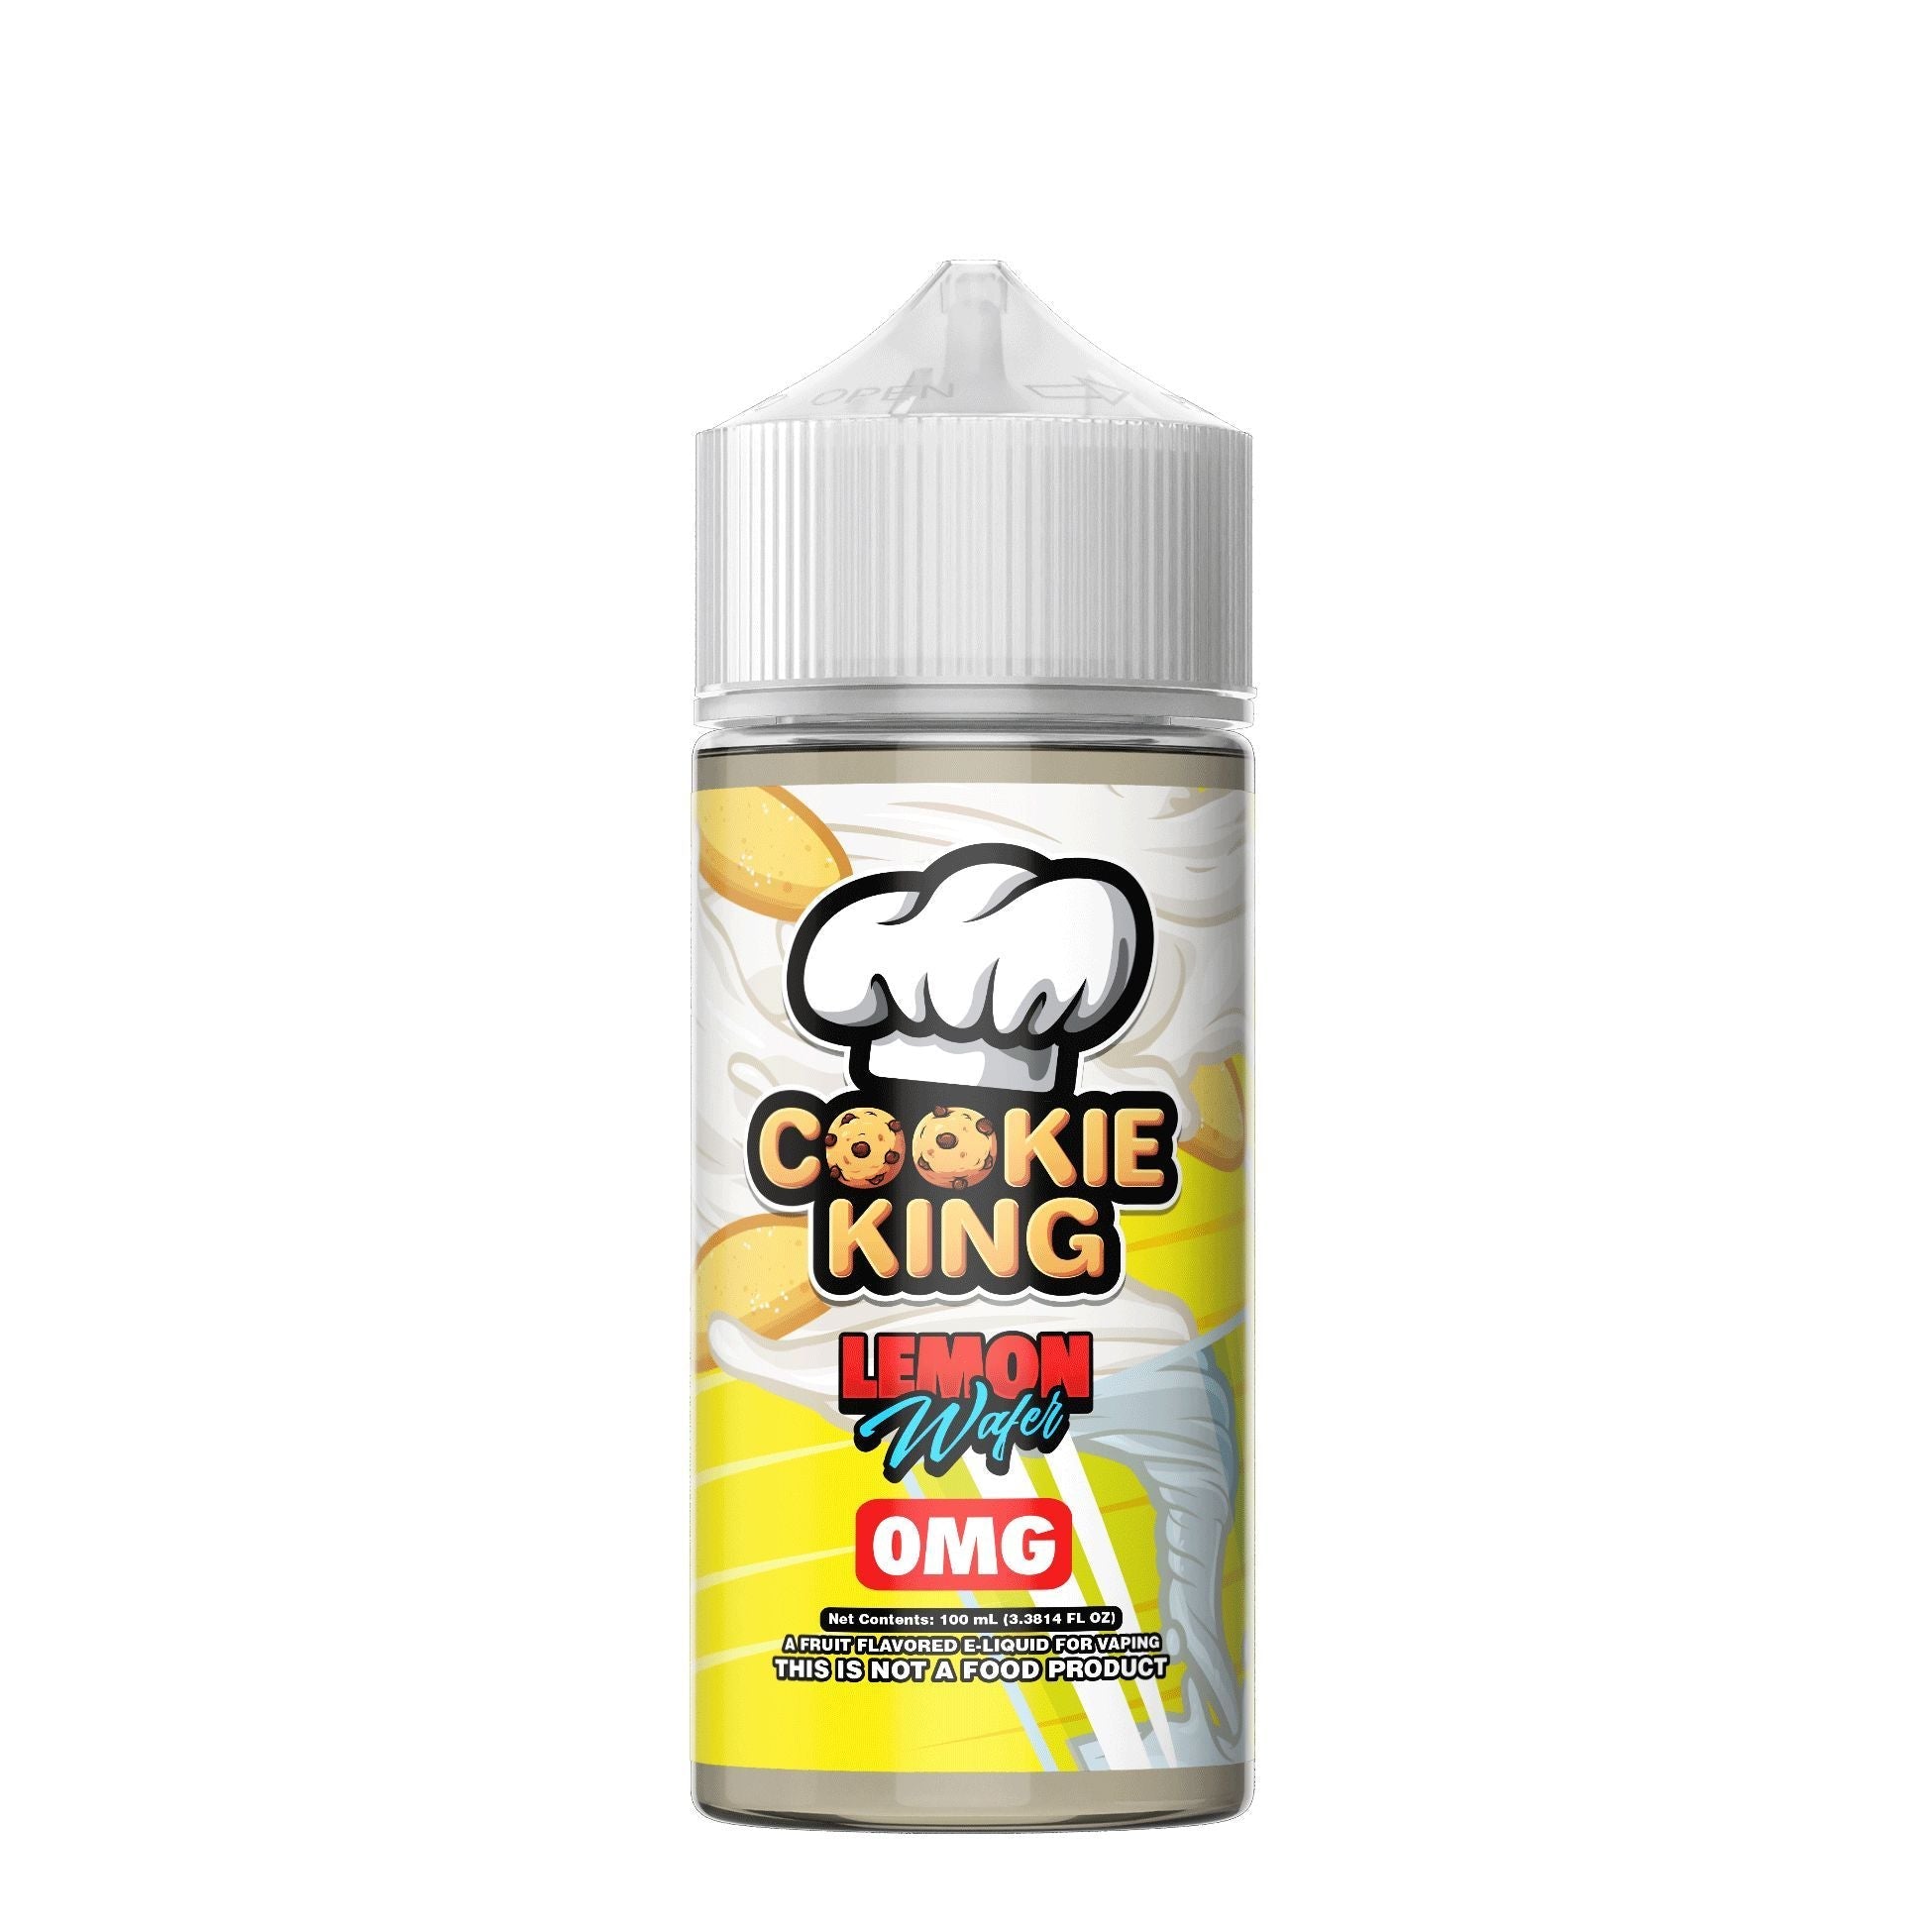 Buy Cookie King Lemon Wafer - Wick and Wire Co Melbourne Vape Shop, Victoria Australia